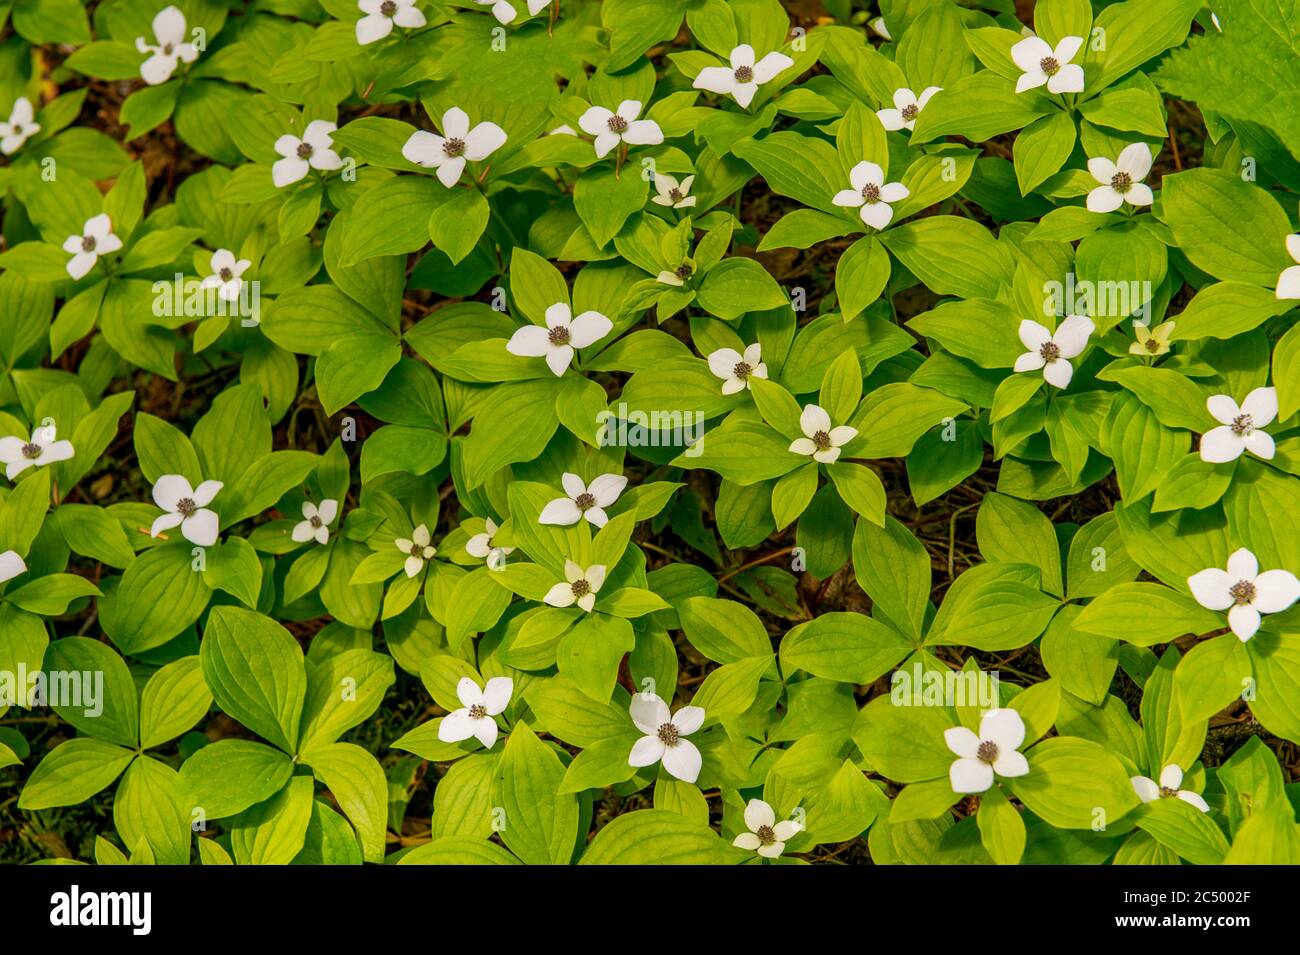 Flowering Dwarf Dogwood (Cornus Canadensis), also known as Bunchberry, in the forest along the Icicle Gorge Trail near Leavenworth, Eastern Washington Stock Photo